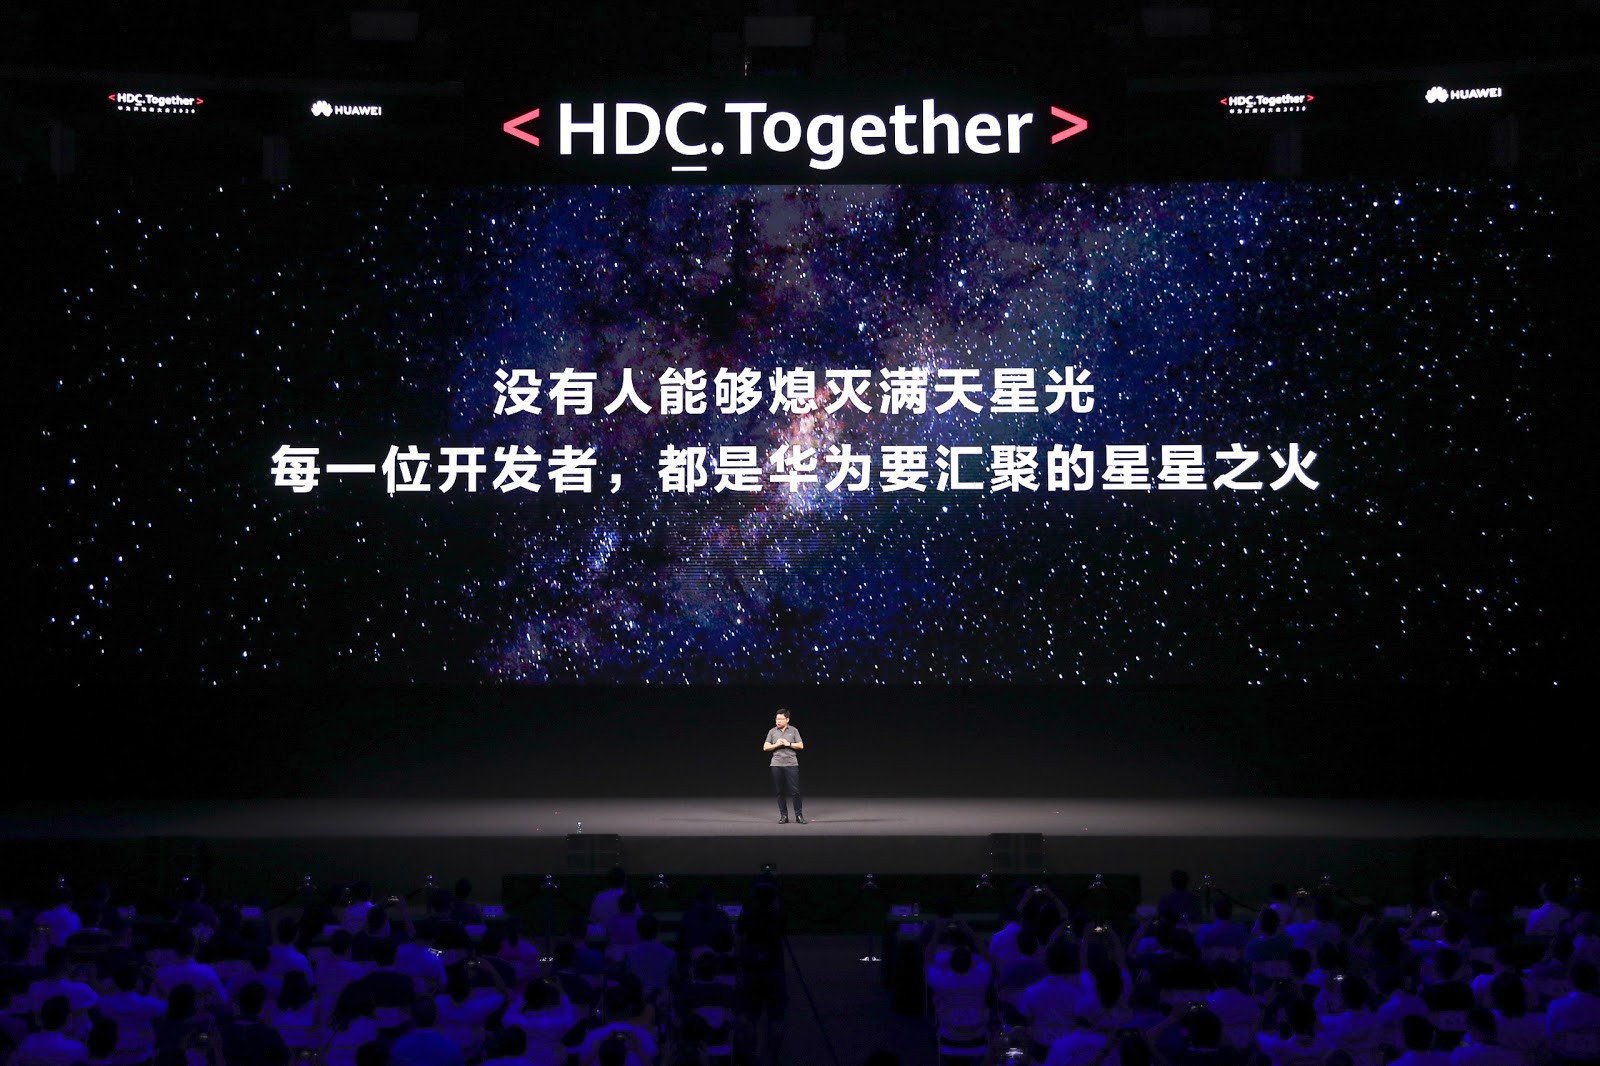 HDC 2020 Together